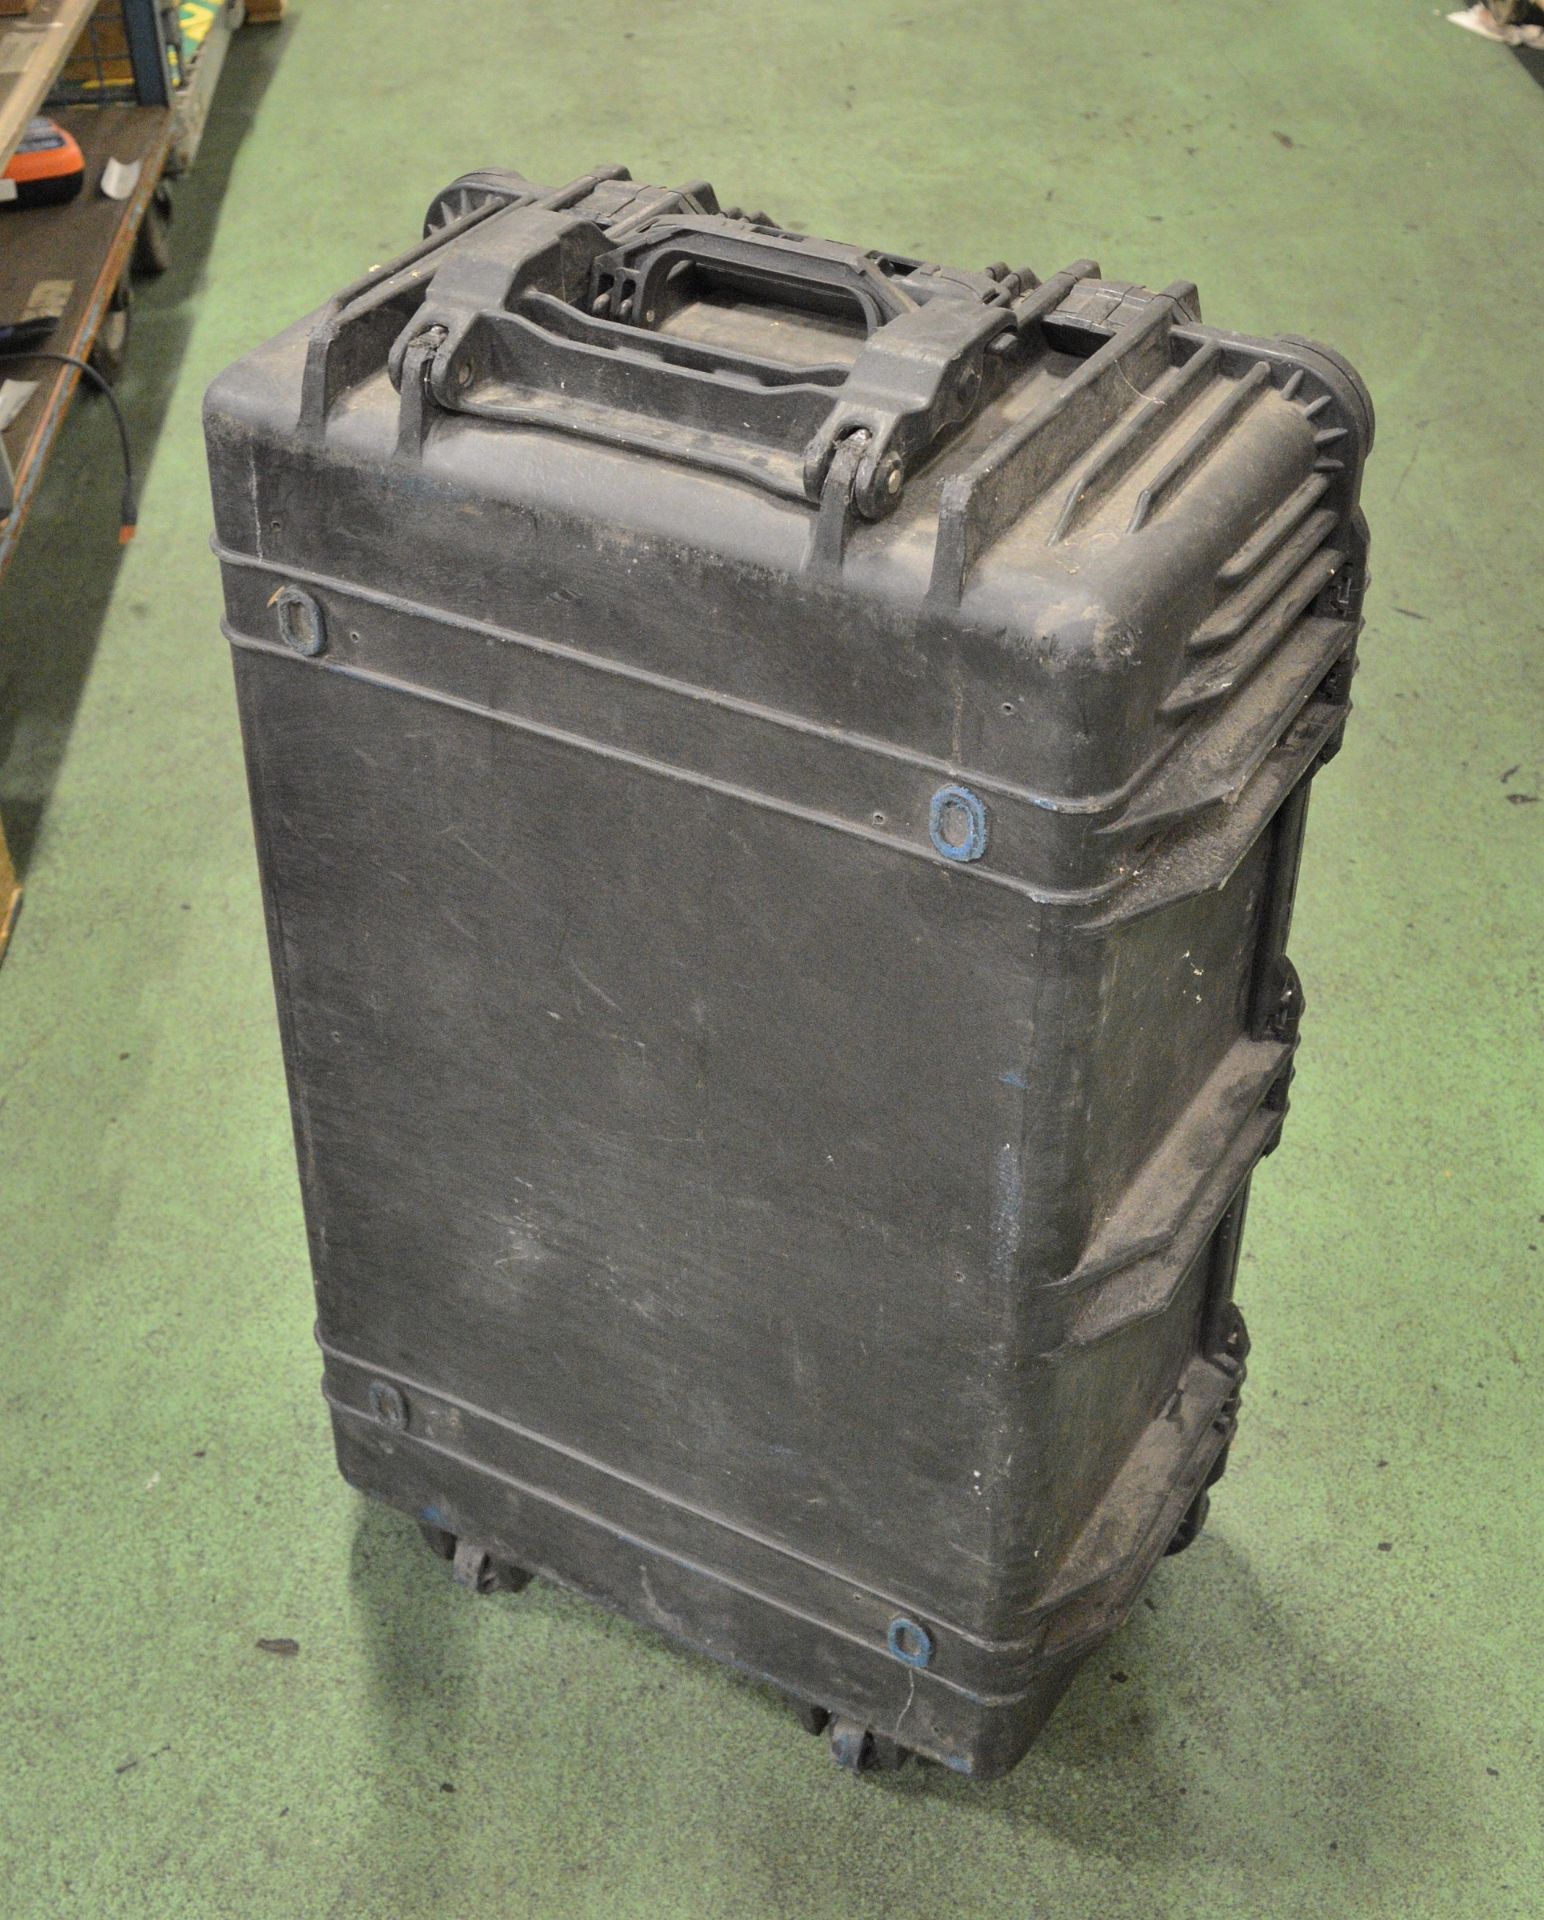 Peli Case 1650 - 760 x 450 x 280 - with wheels - NOT AIR TIGHT - Image 2 of 4